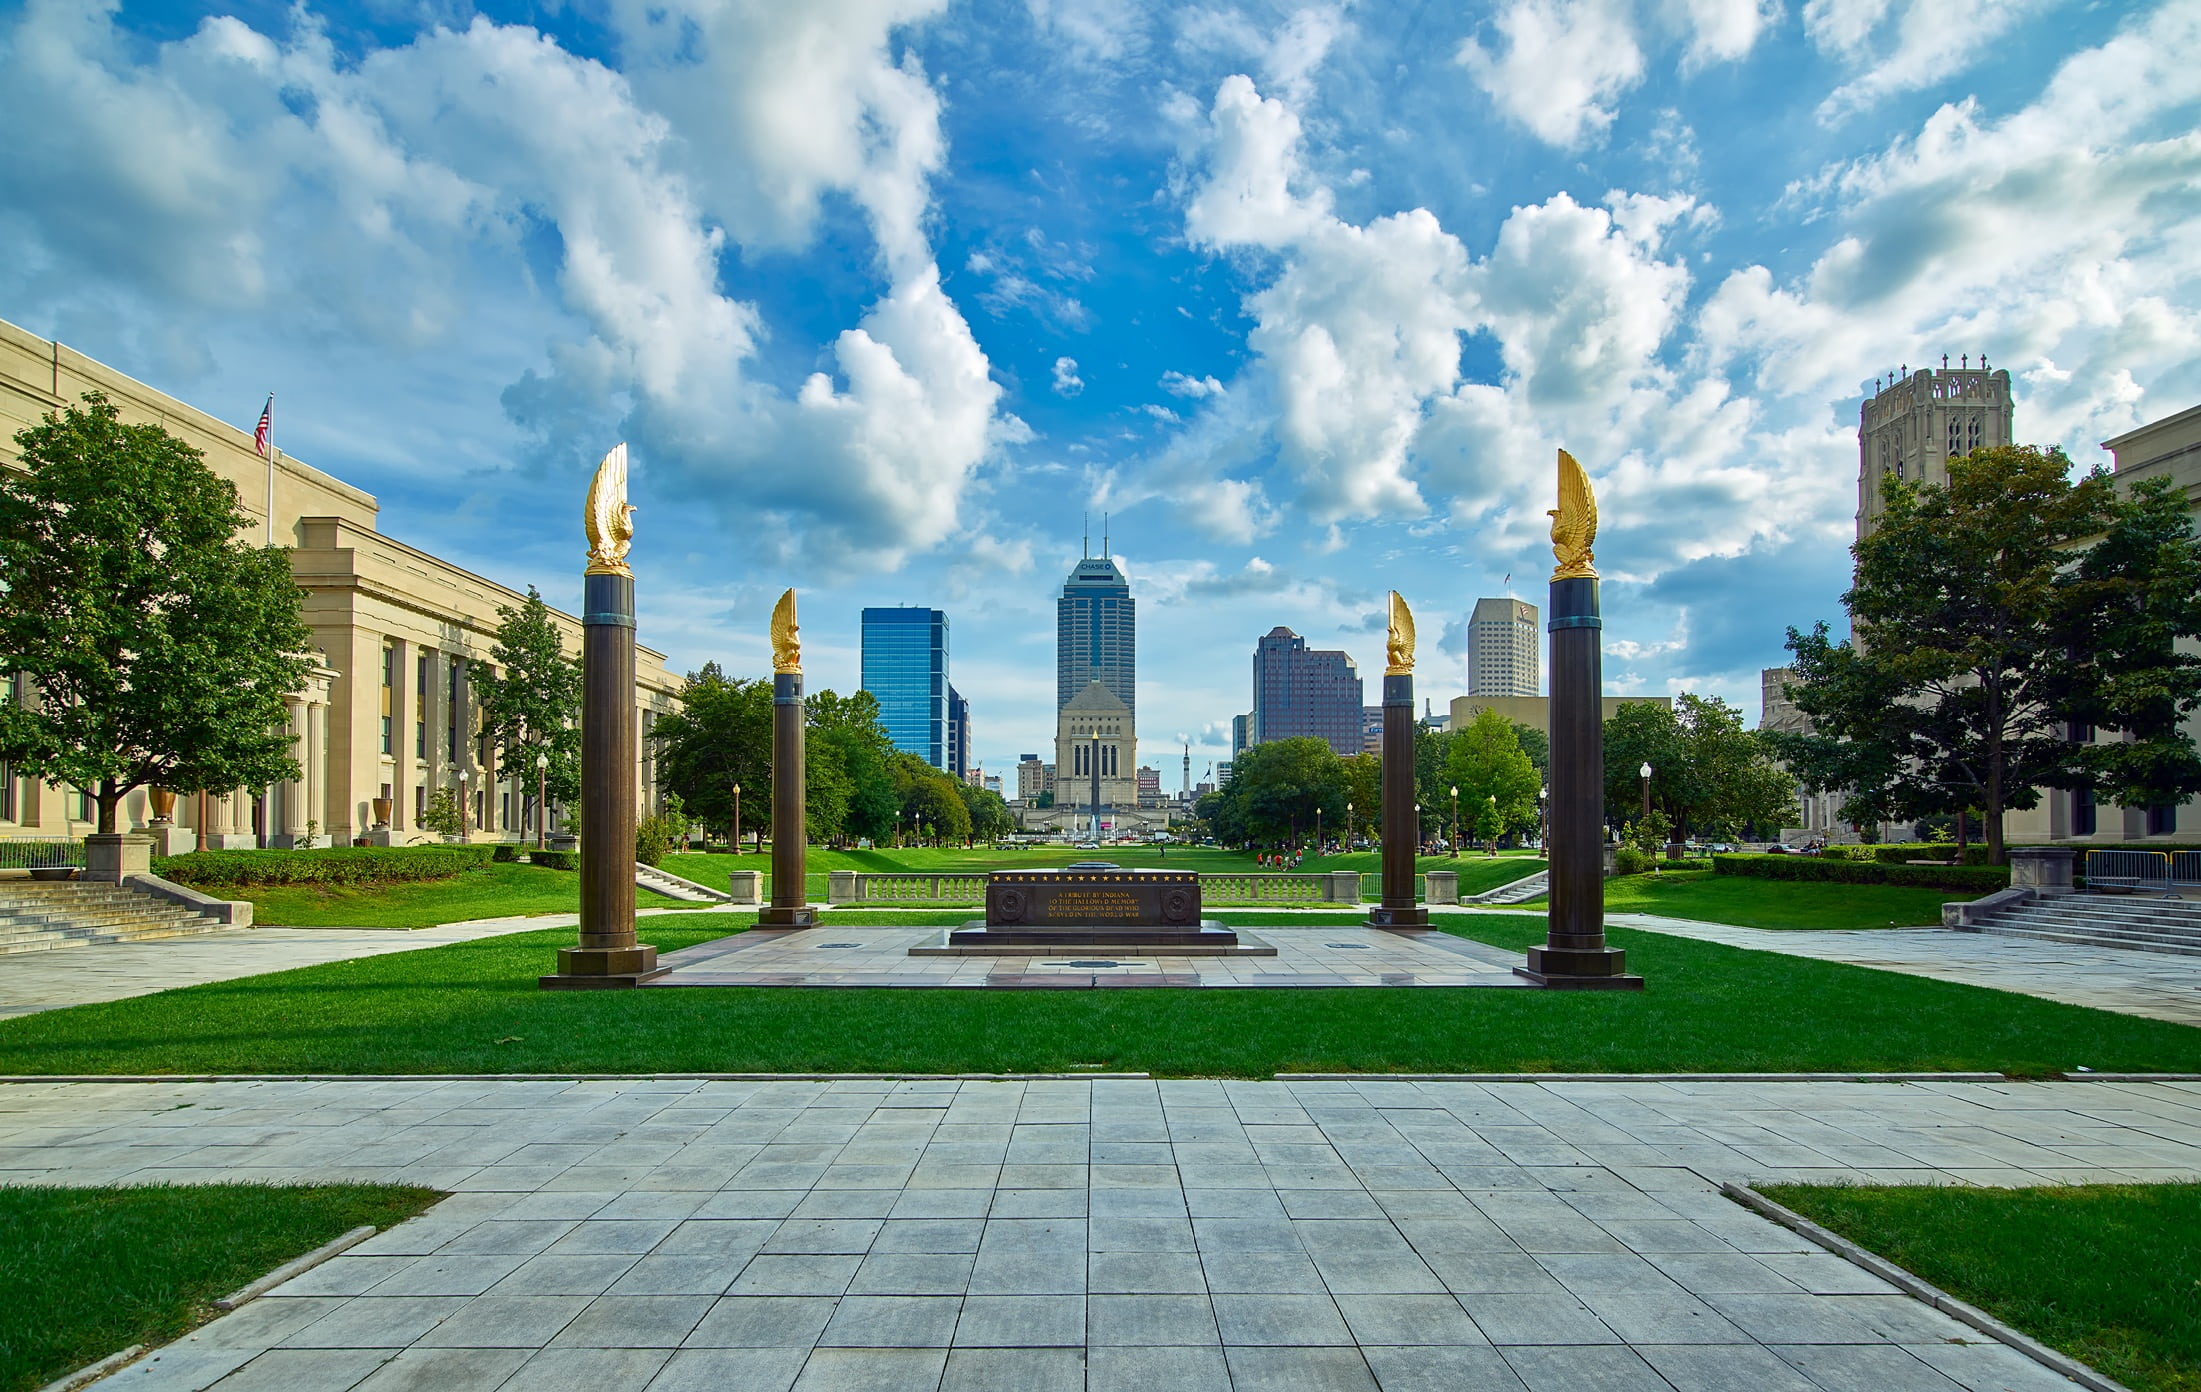 outdoor monument in park during daytime, indianapolis, city, urban